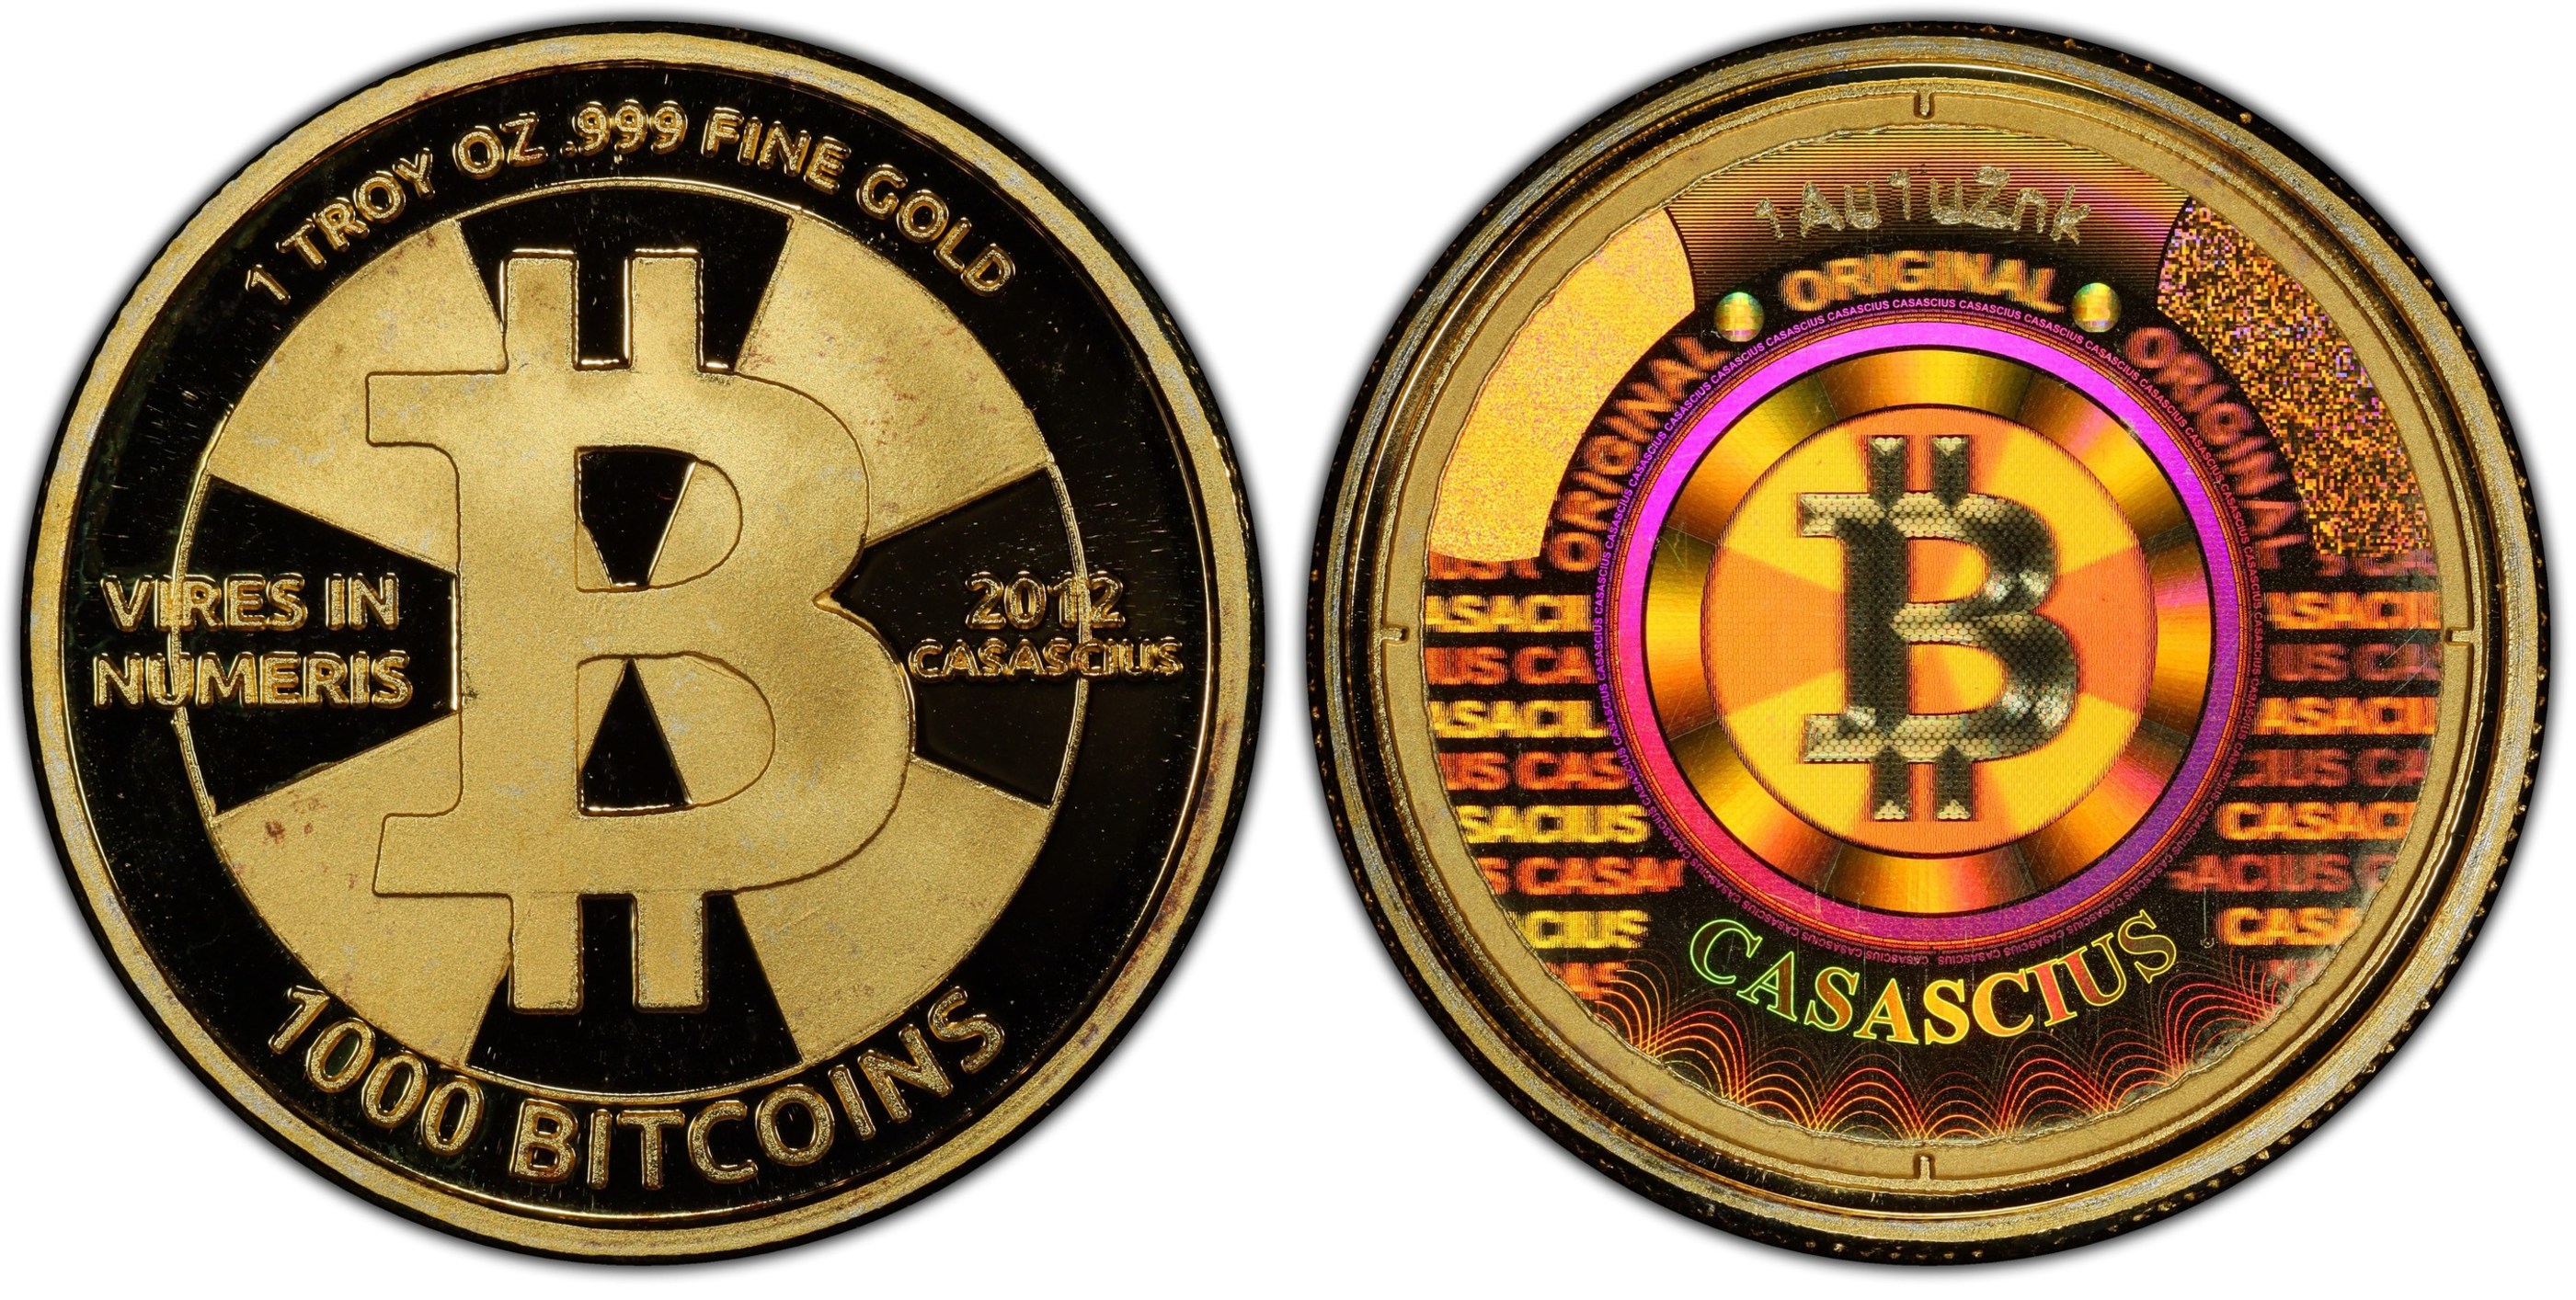 Compare prices of 1 oz Gold Bitcoin Round from online dealers